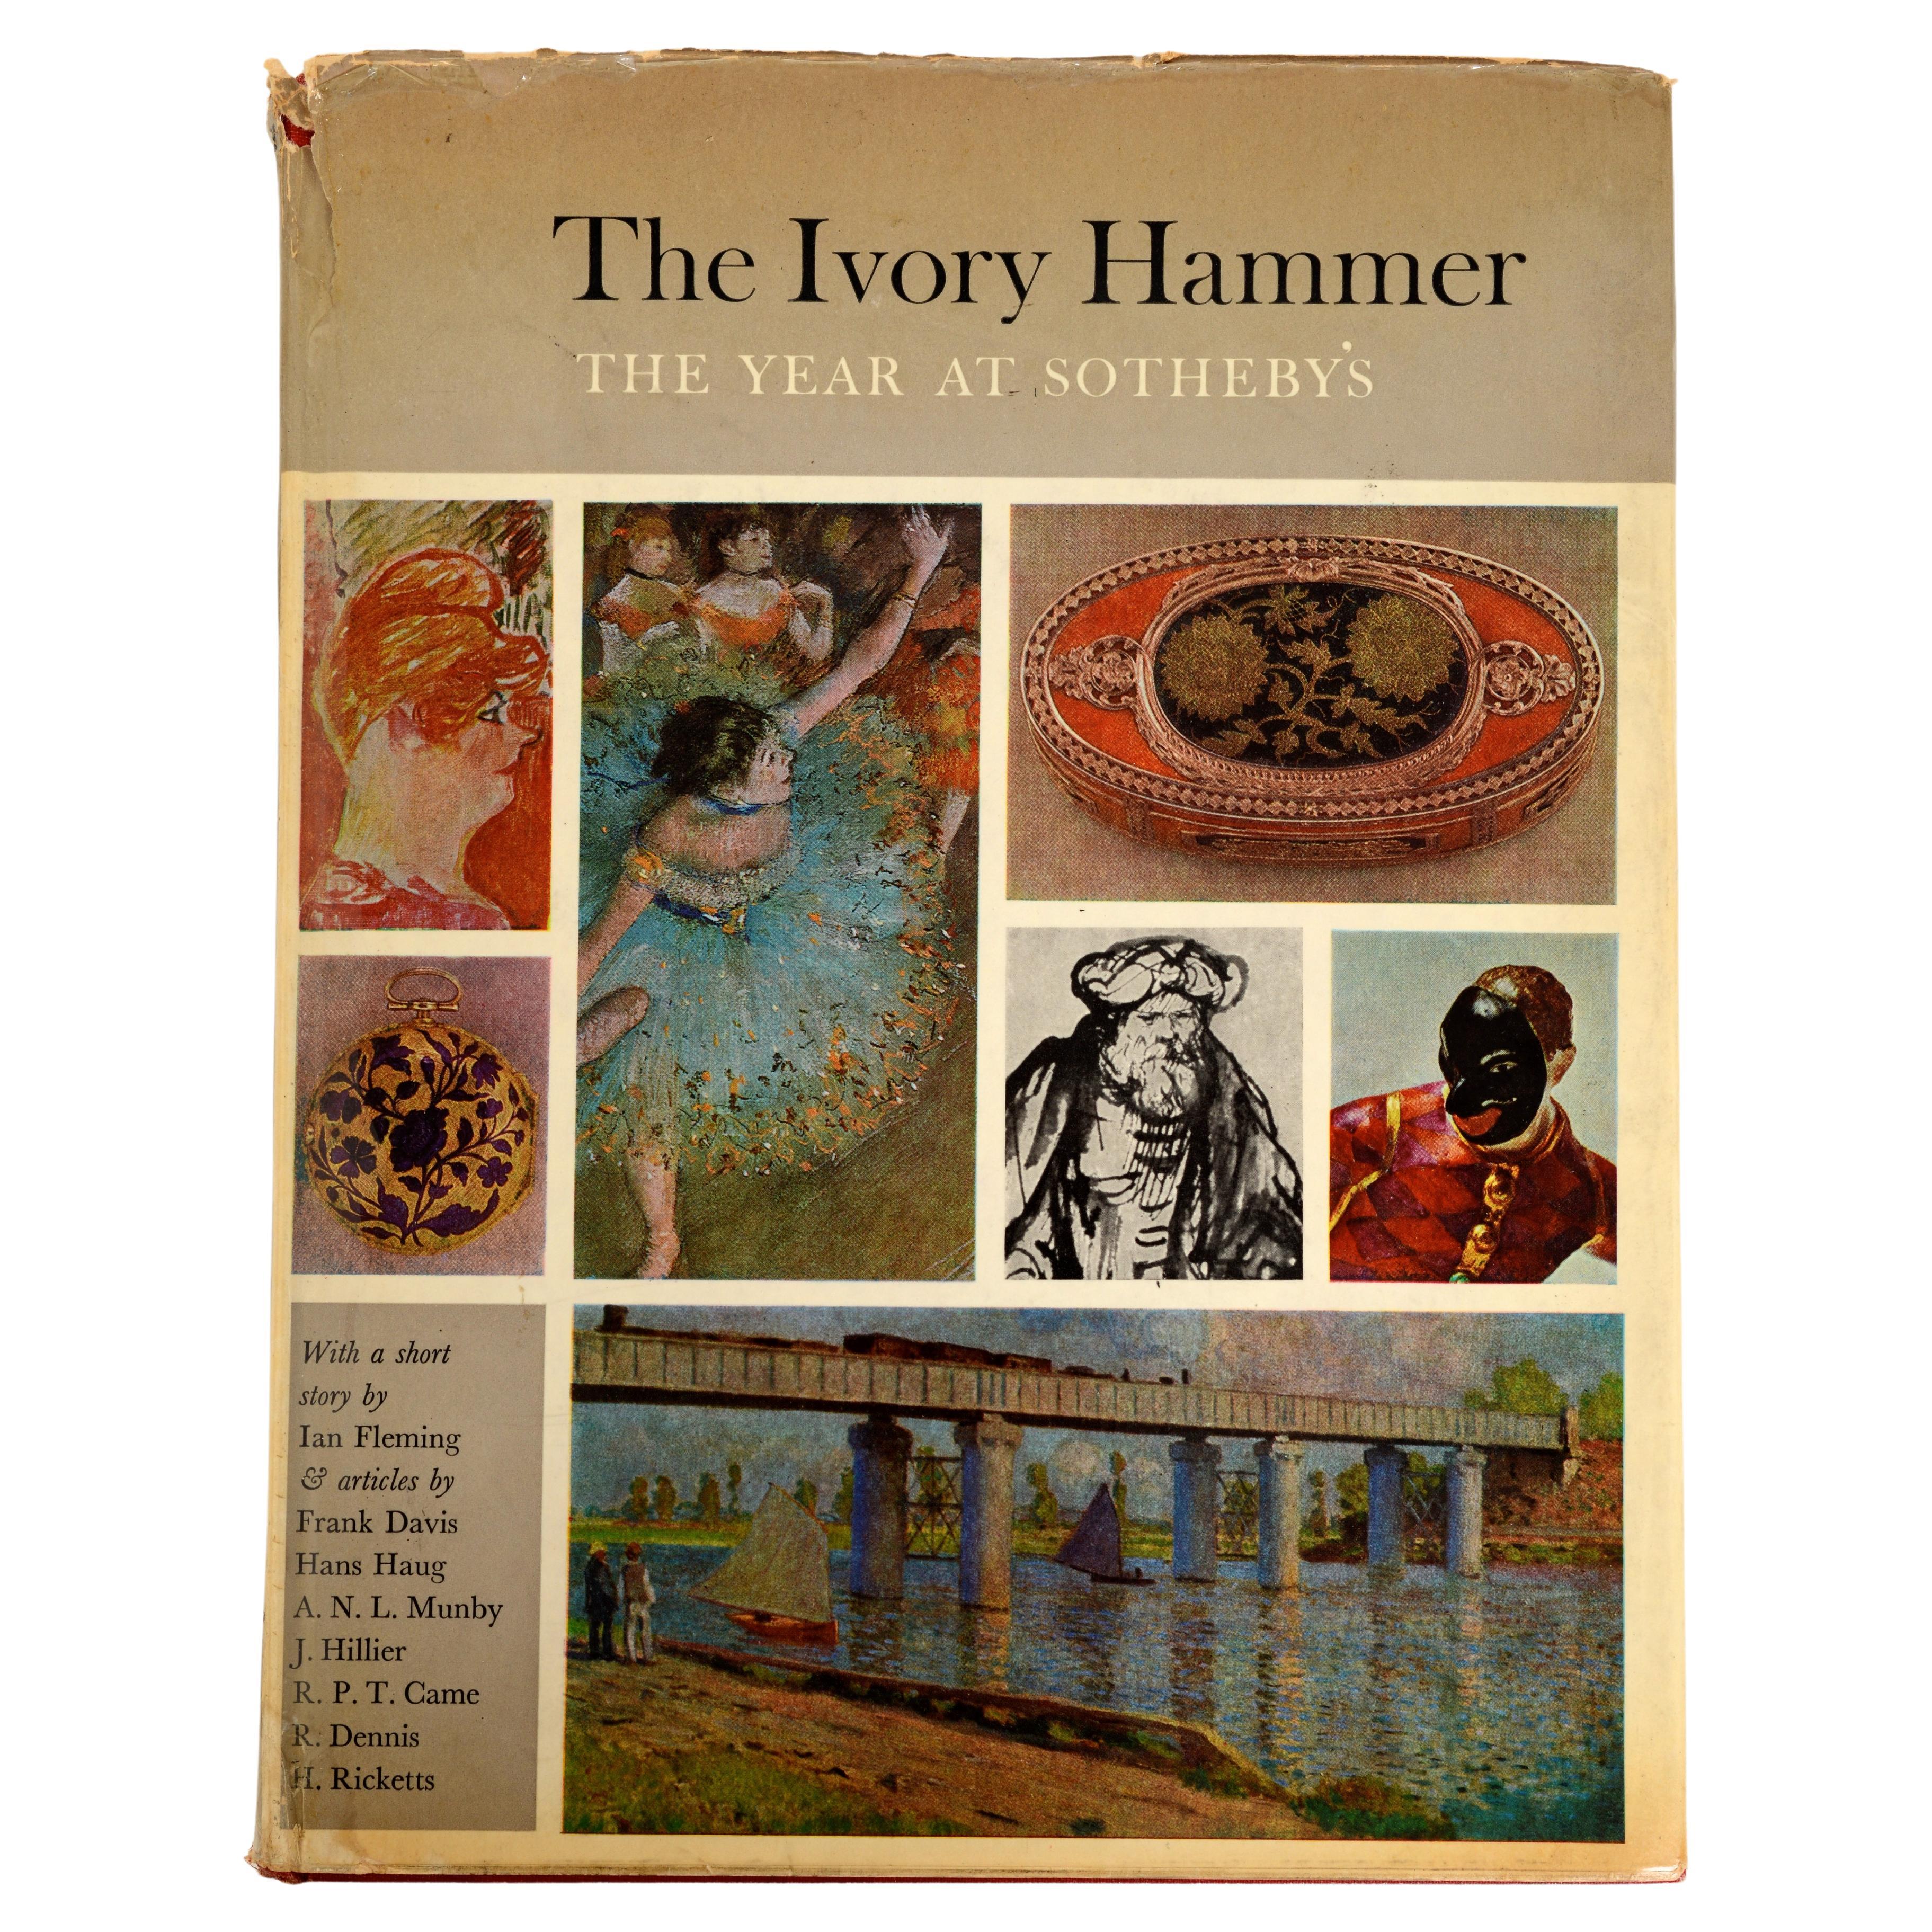 The Ivory Hammer, The Year At Sotheby's, 1962-1963, Ian Fleming James Bond Story